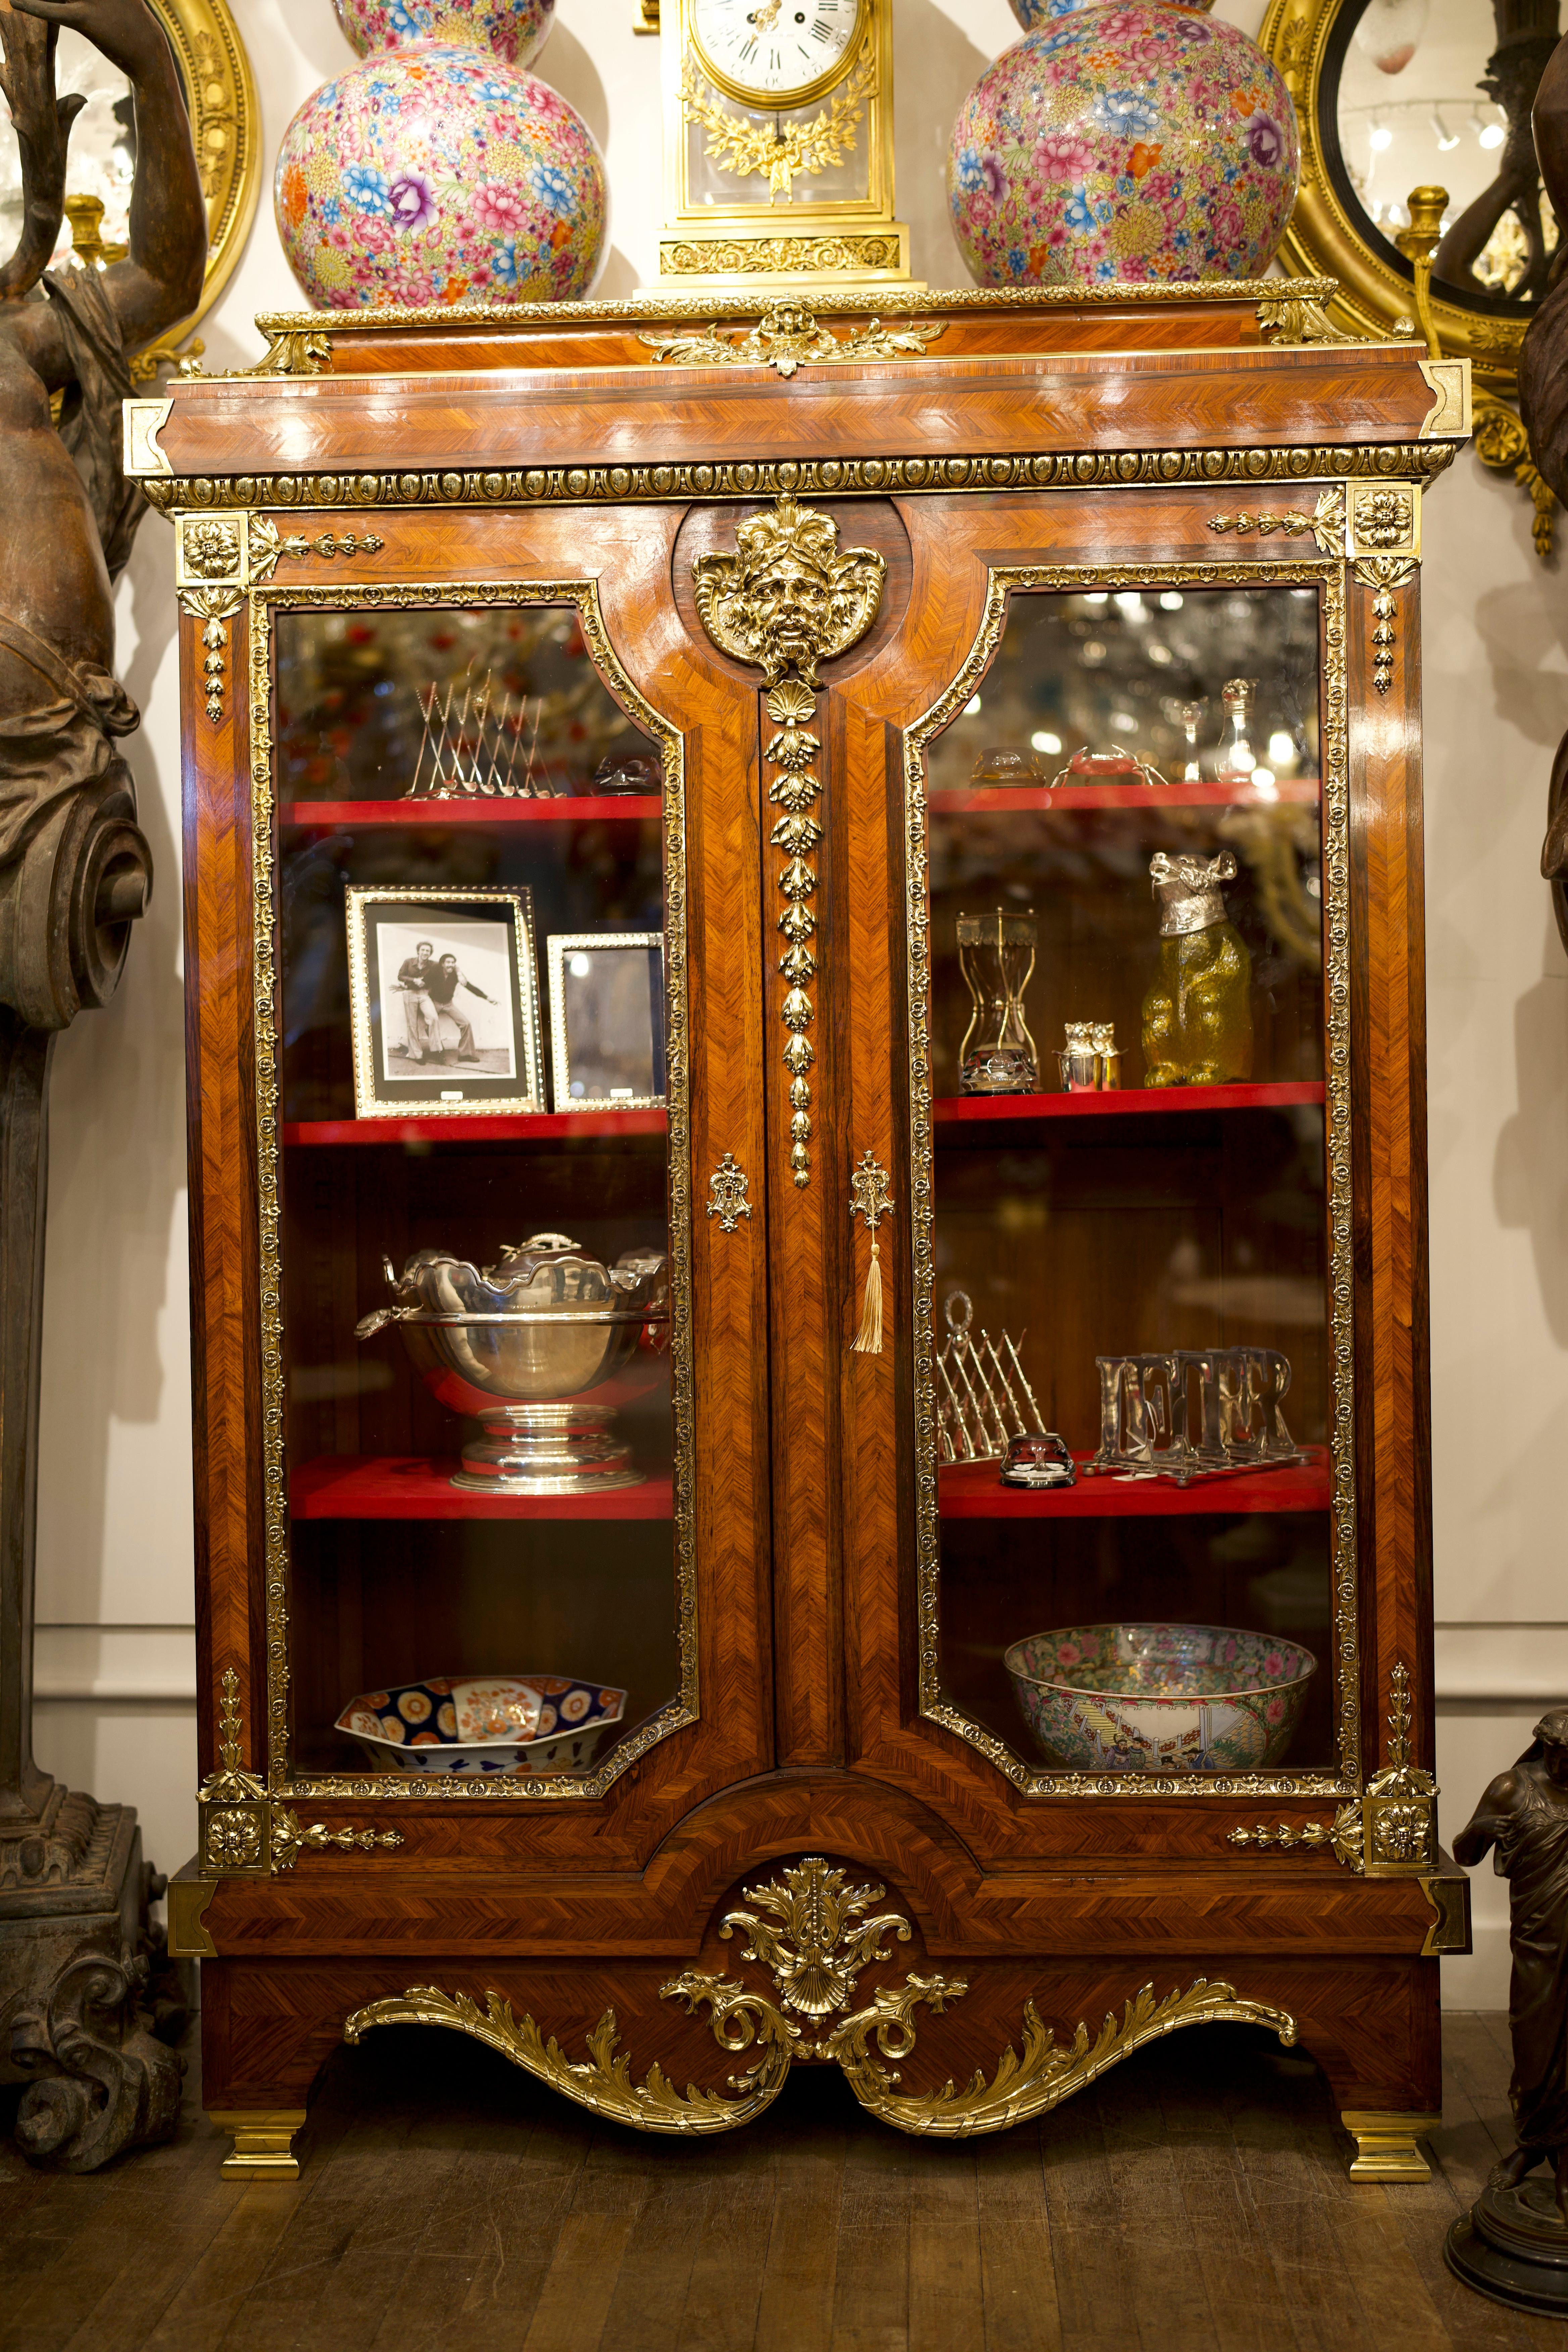 A stunning 18th Century Ormolu Mounted French Kingwood Cabinet/Vitrine.

The cabinet features twin large glazed doors. Each door is finished with Kingwood and separated by inlaid brass banding and set with finely wrought gold gilt mounts. The twin